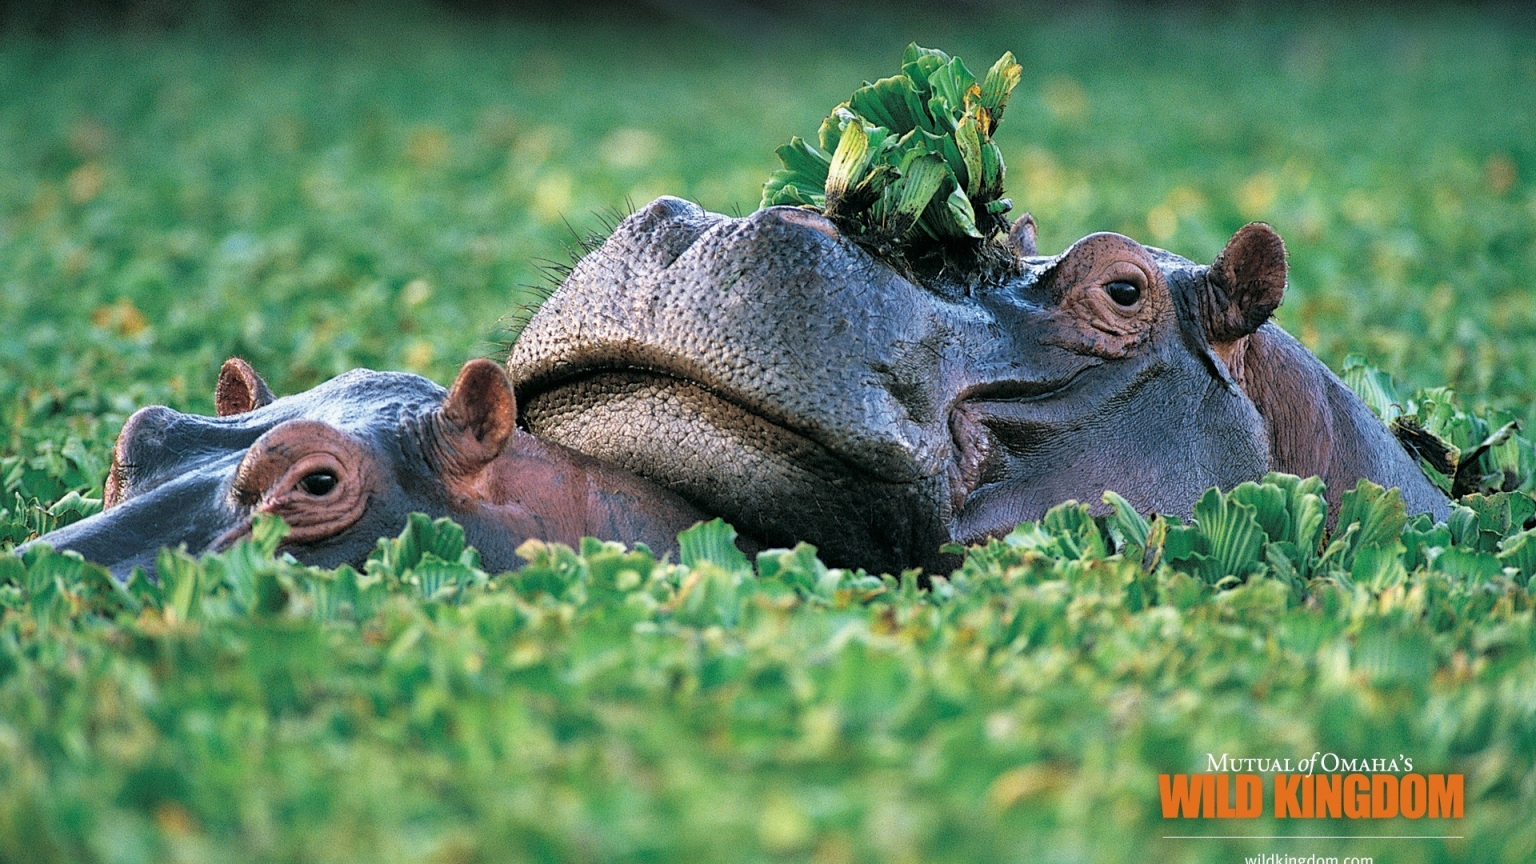 Hippos for 1536 x 864 HDTV resolution